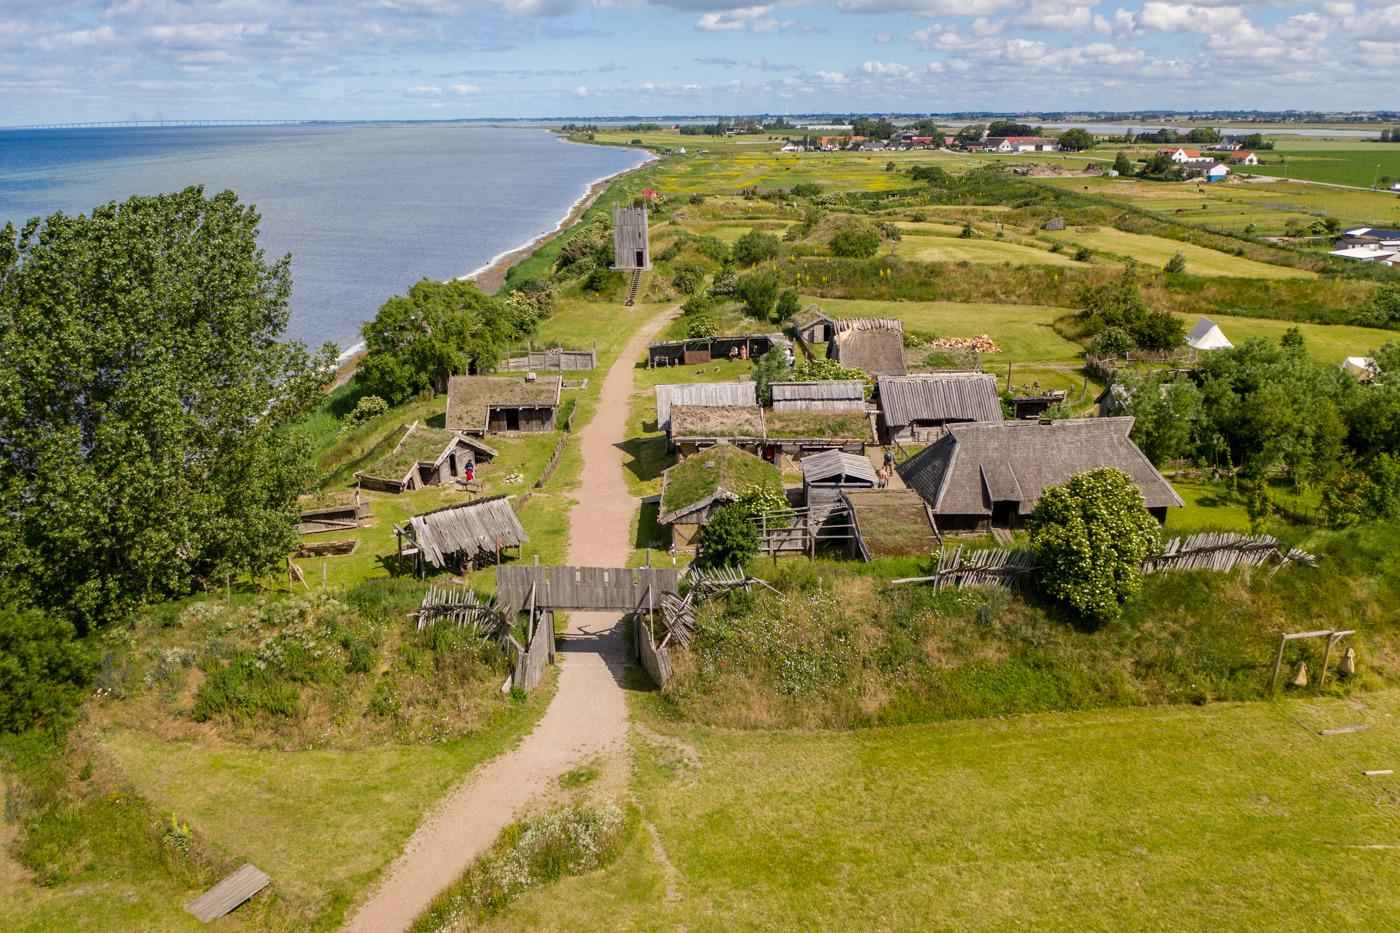 An aerial view of a viking village situated by the sea.